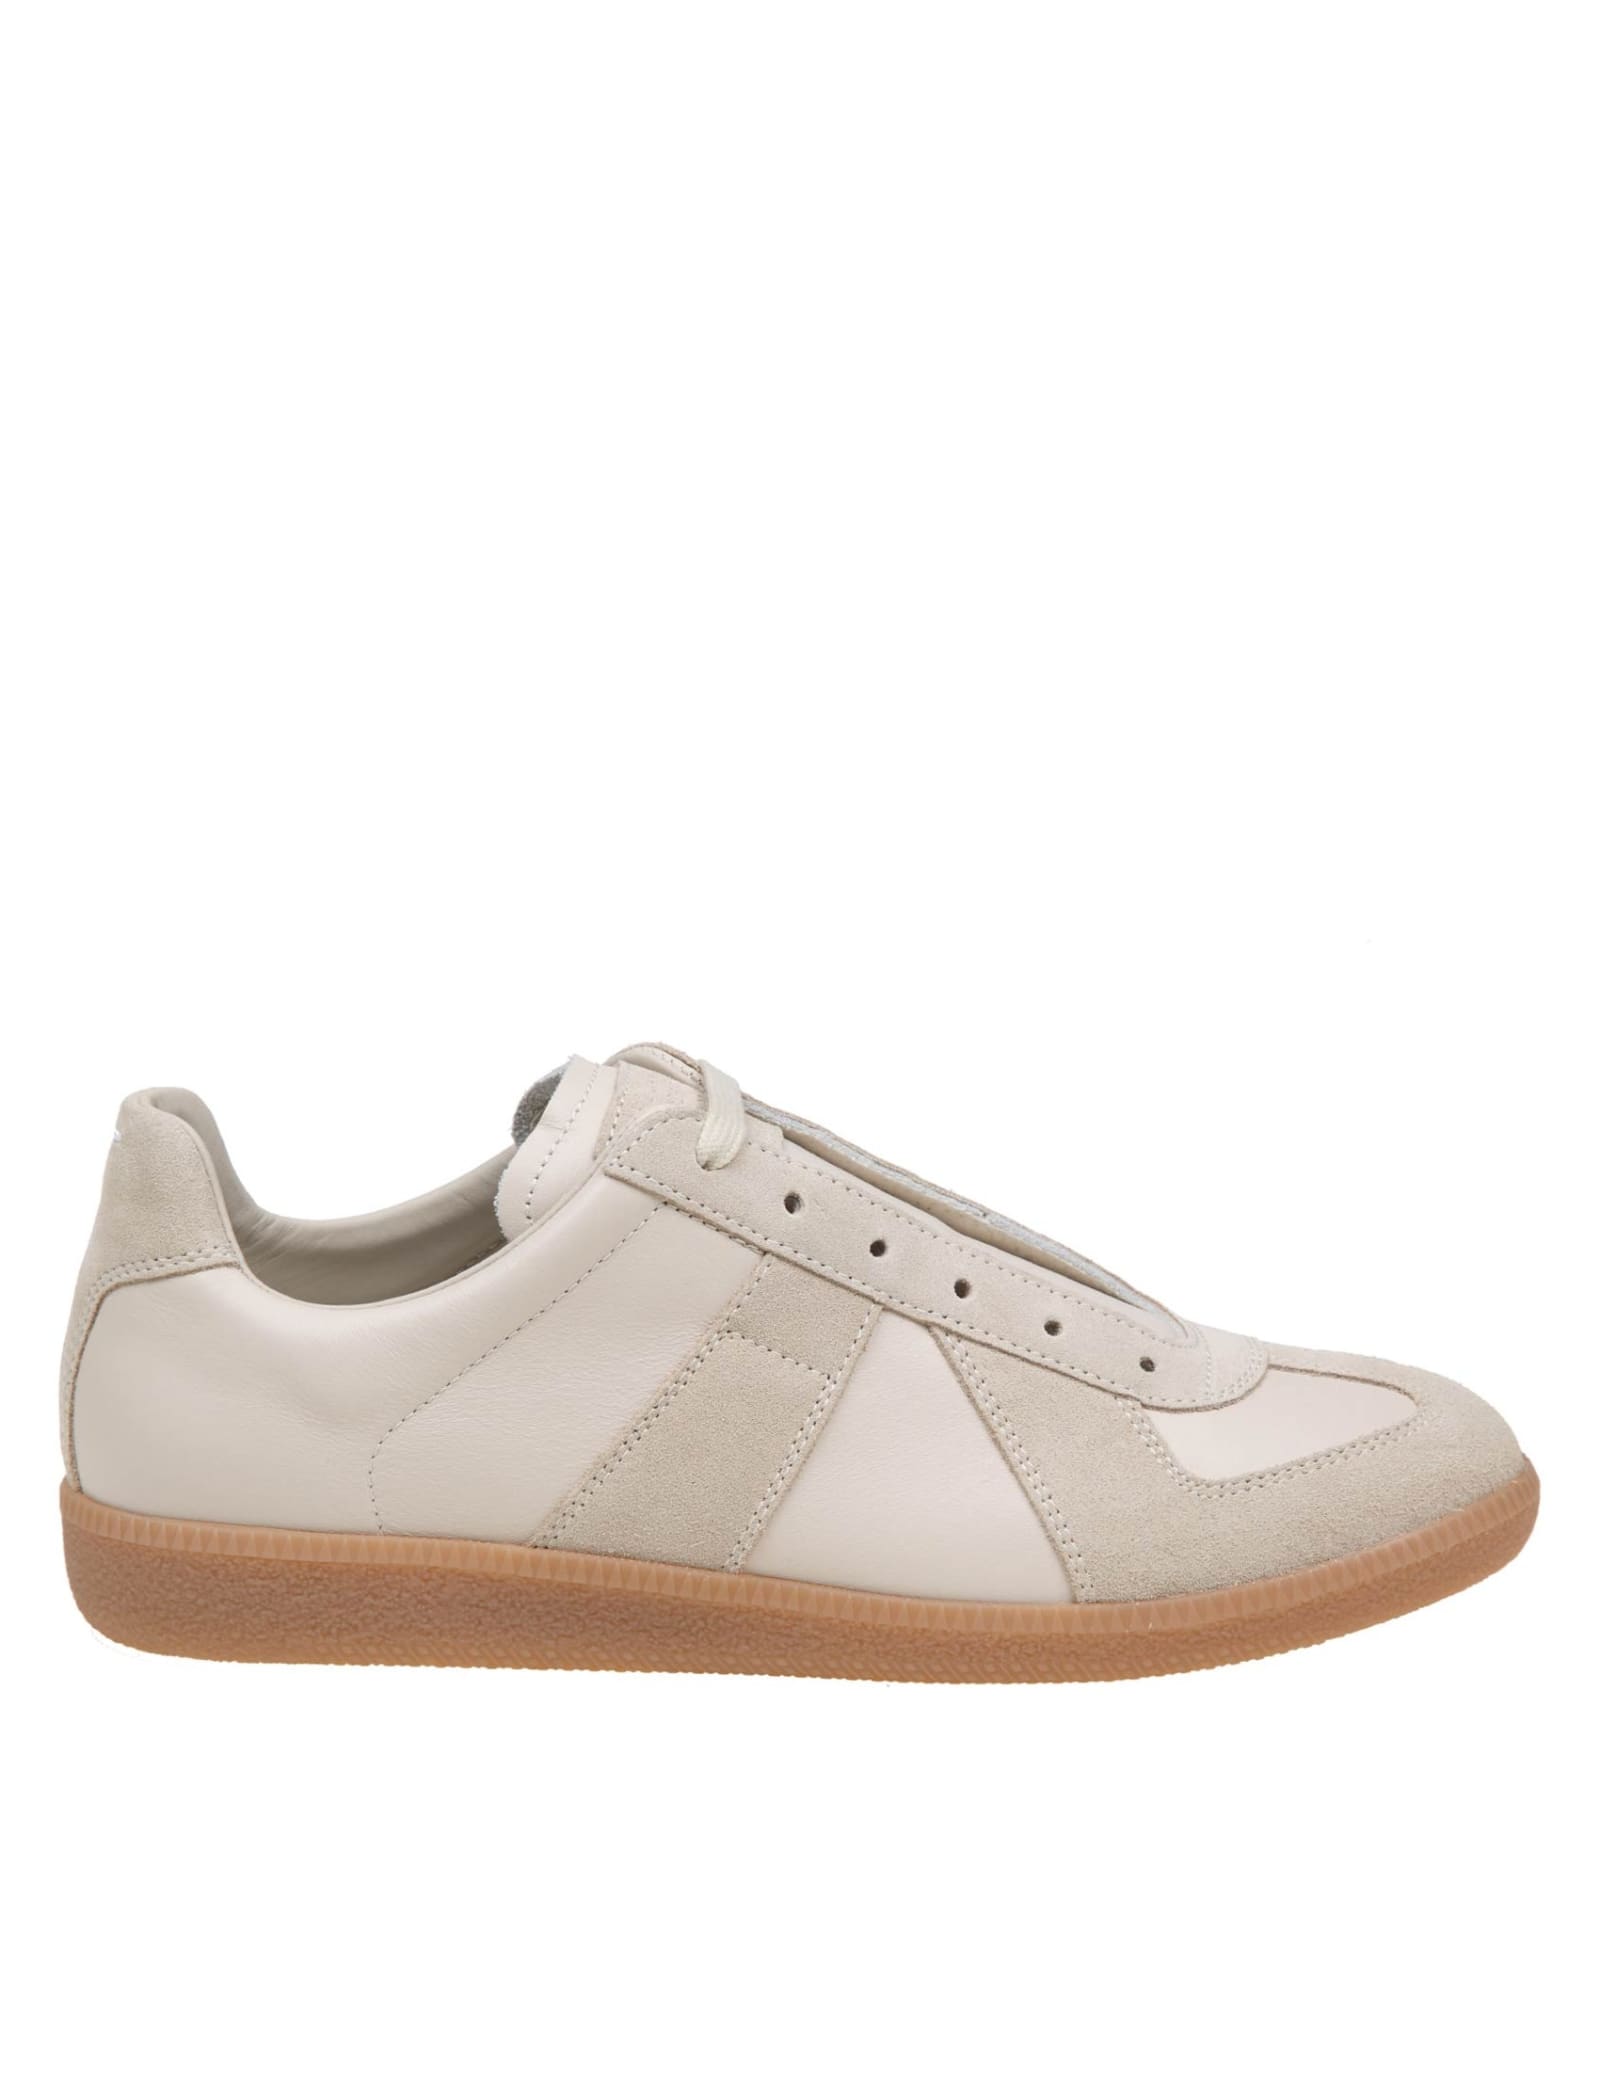 Maison Margiela Replica Sneakers In Leather And Suede In Beige